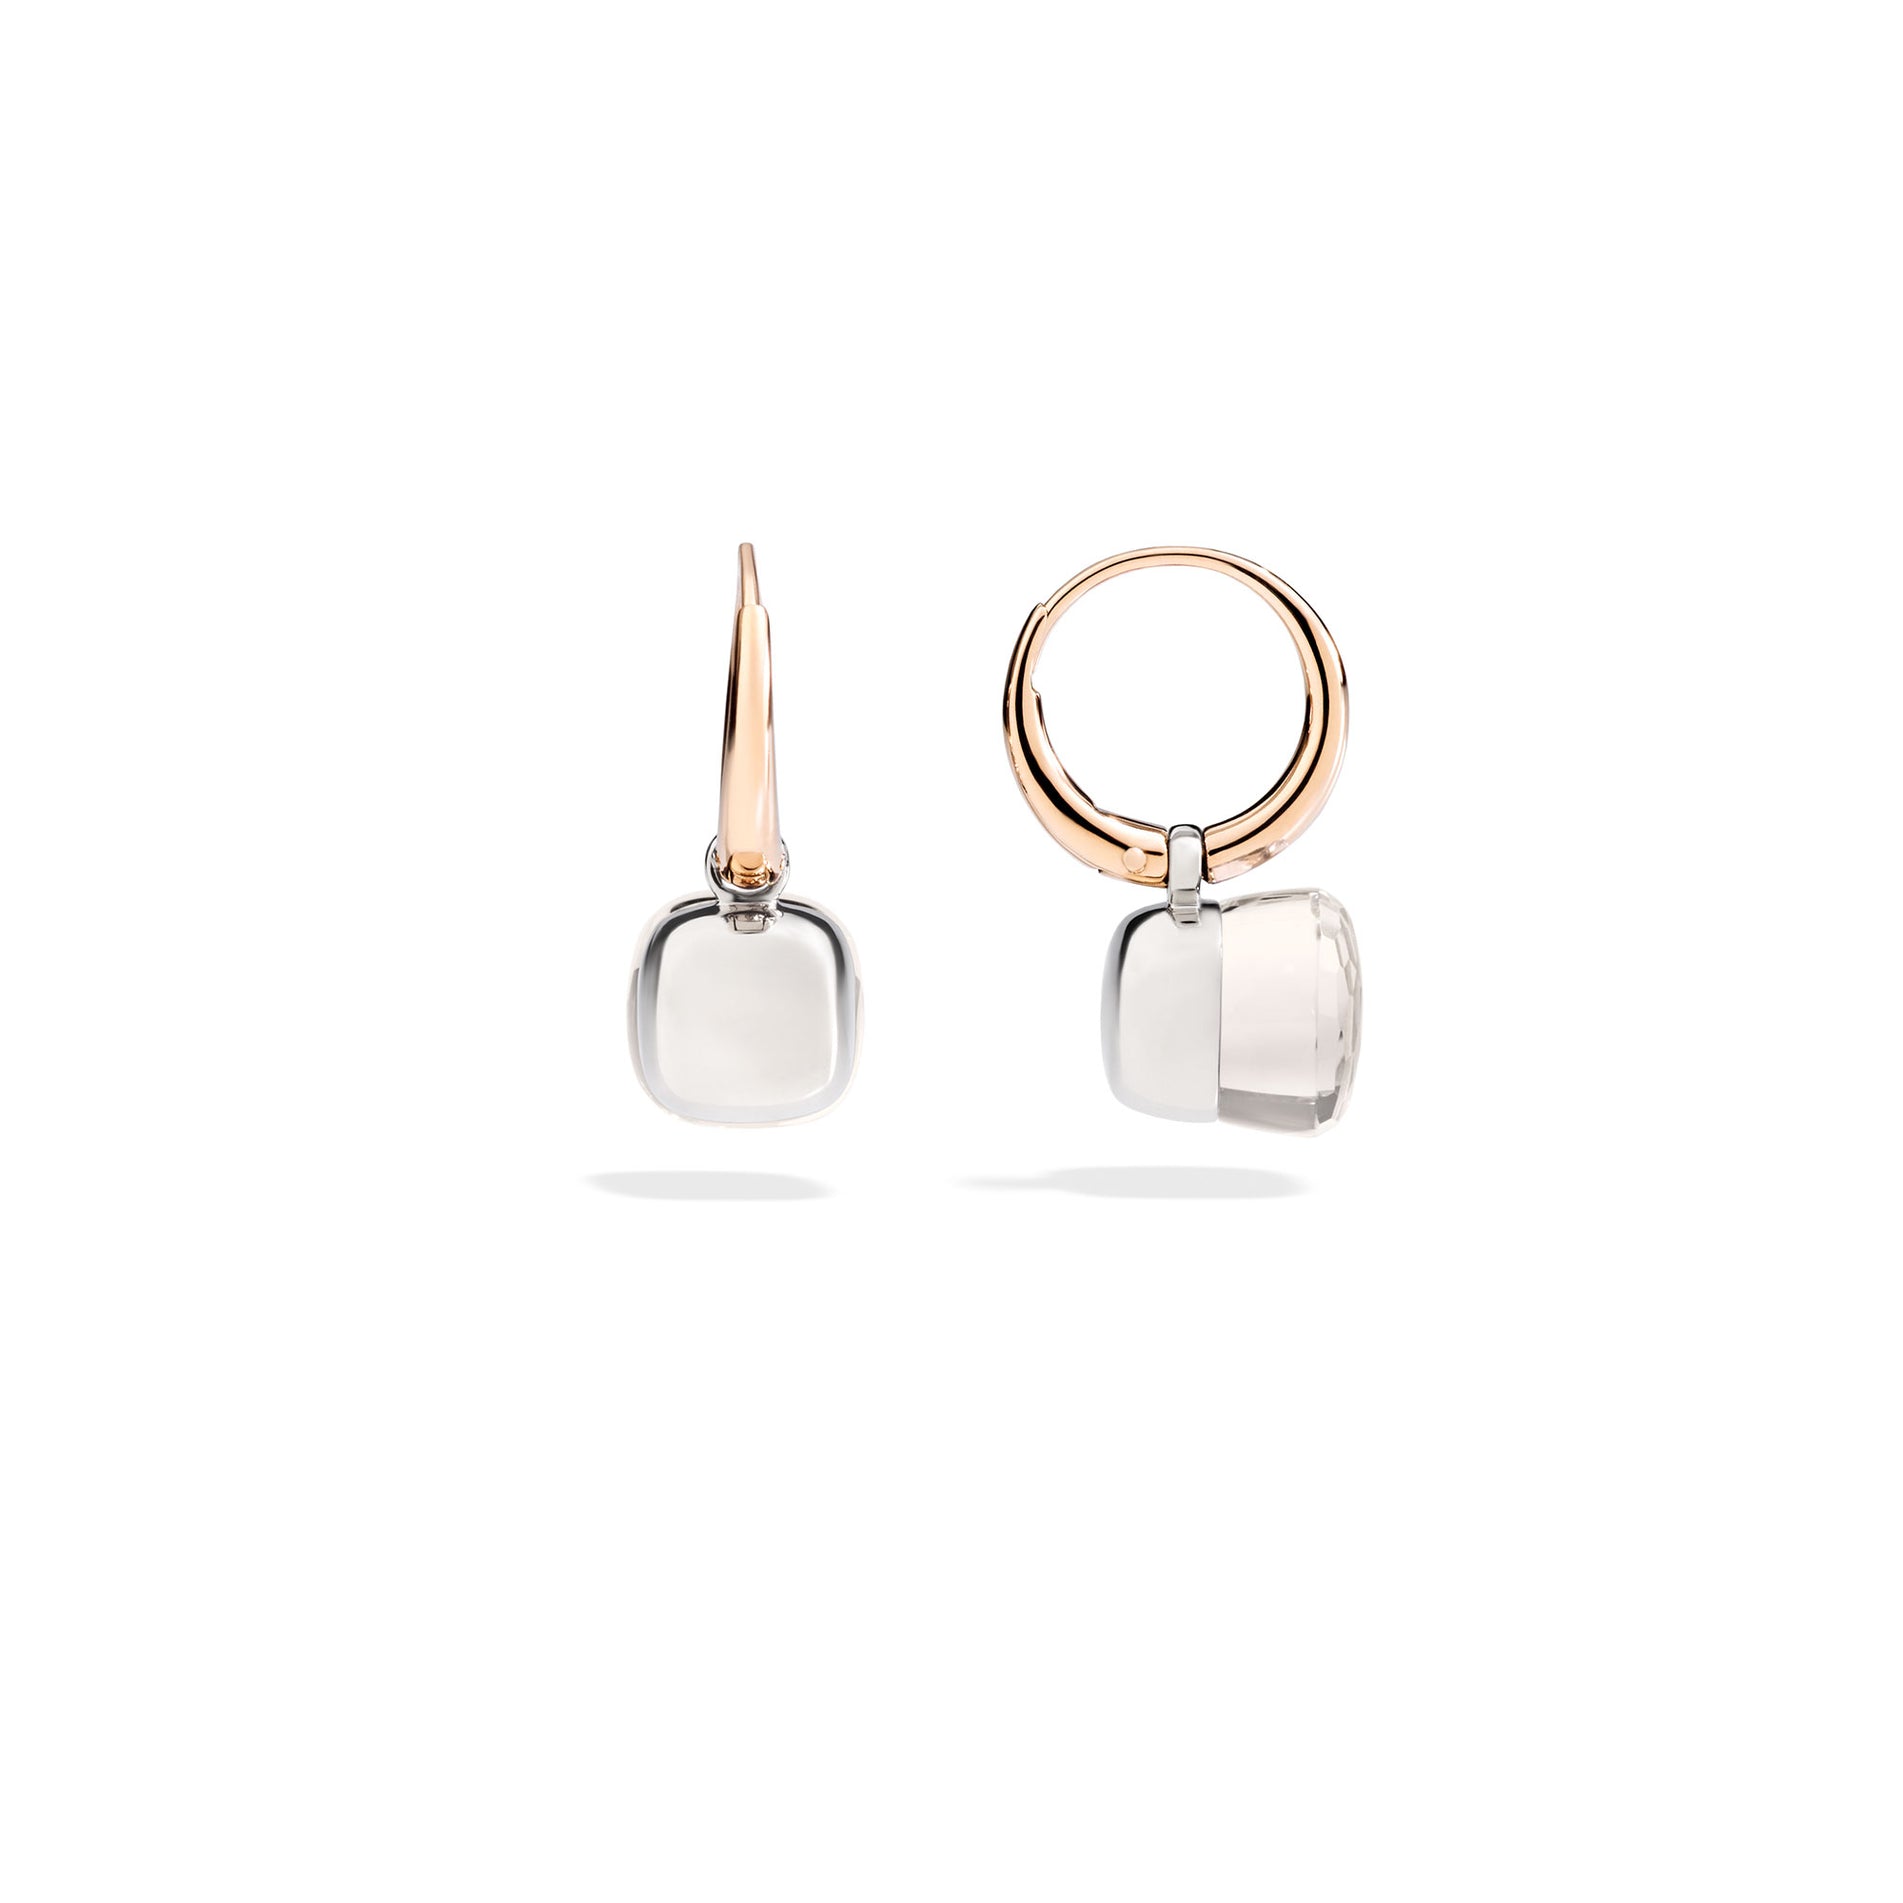 Nudo Petit Earrings in 18k Rose Gold and White Gold with White Topaz - Orsini Jewellers NZ